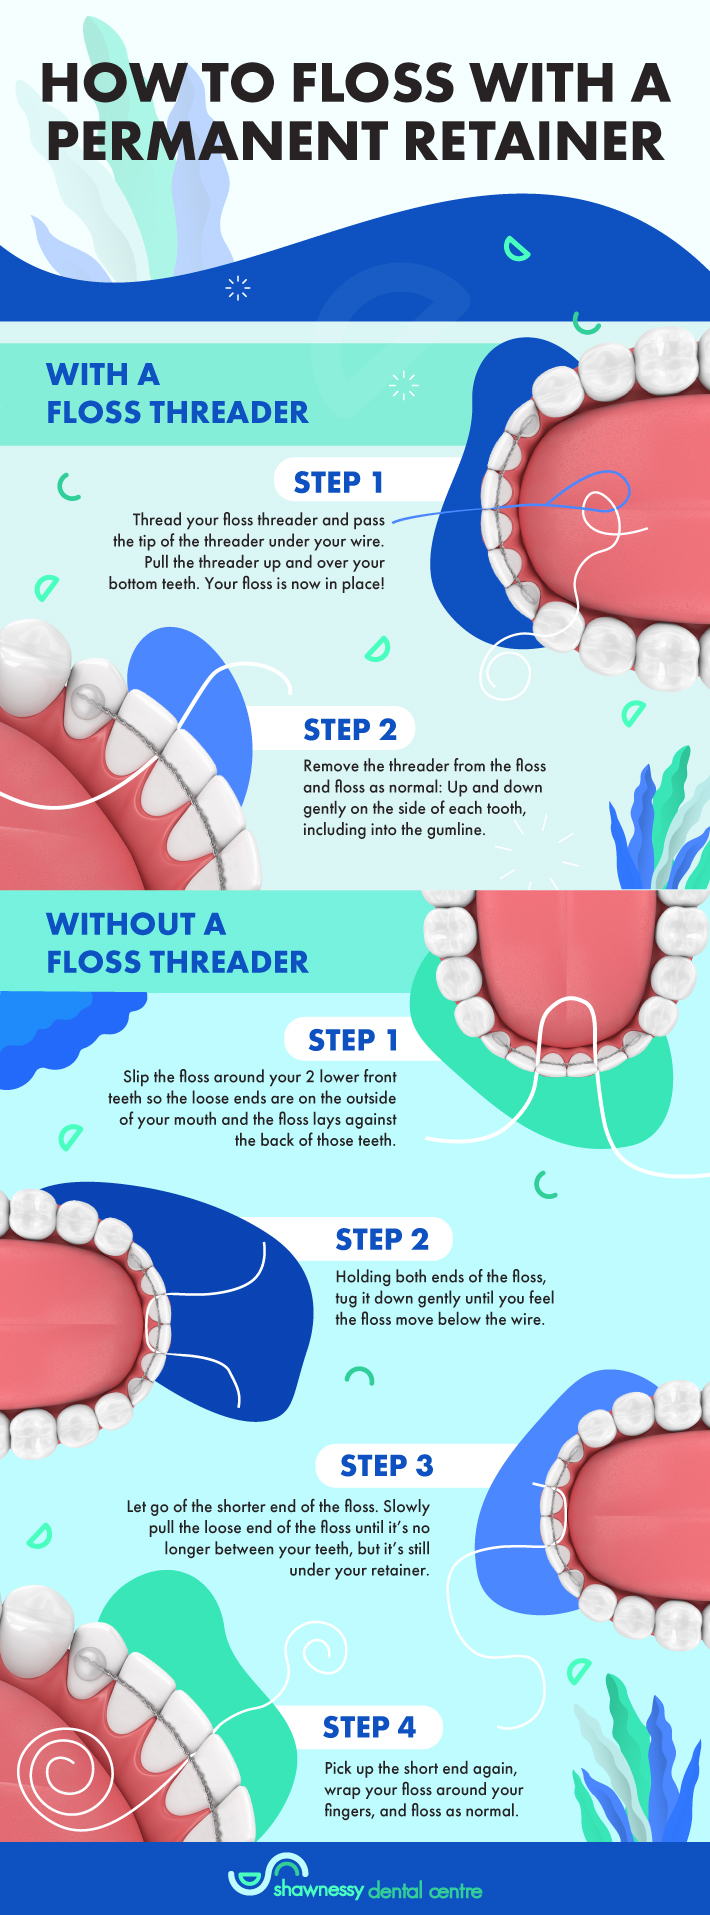 An infographic with a step-by-step demonstration of how to floss with a floss threader and without a floss threader.